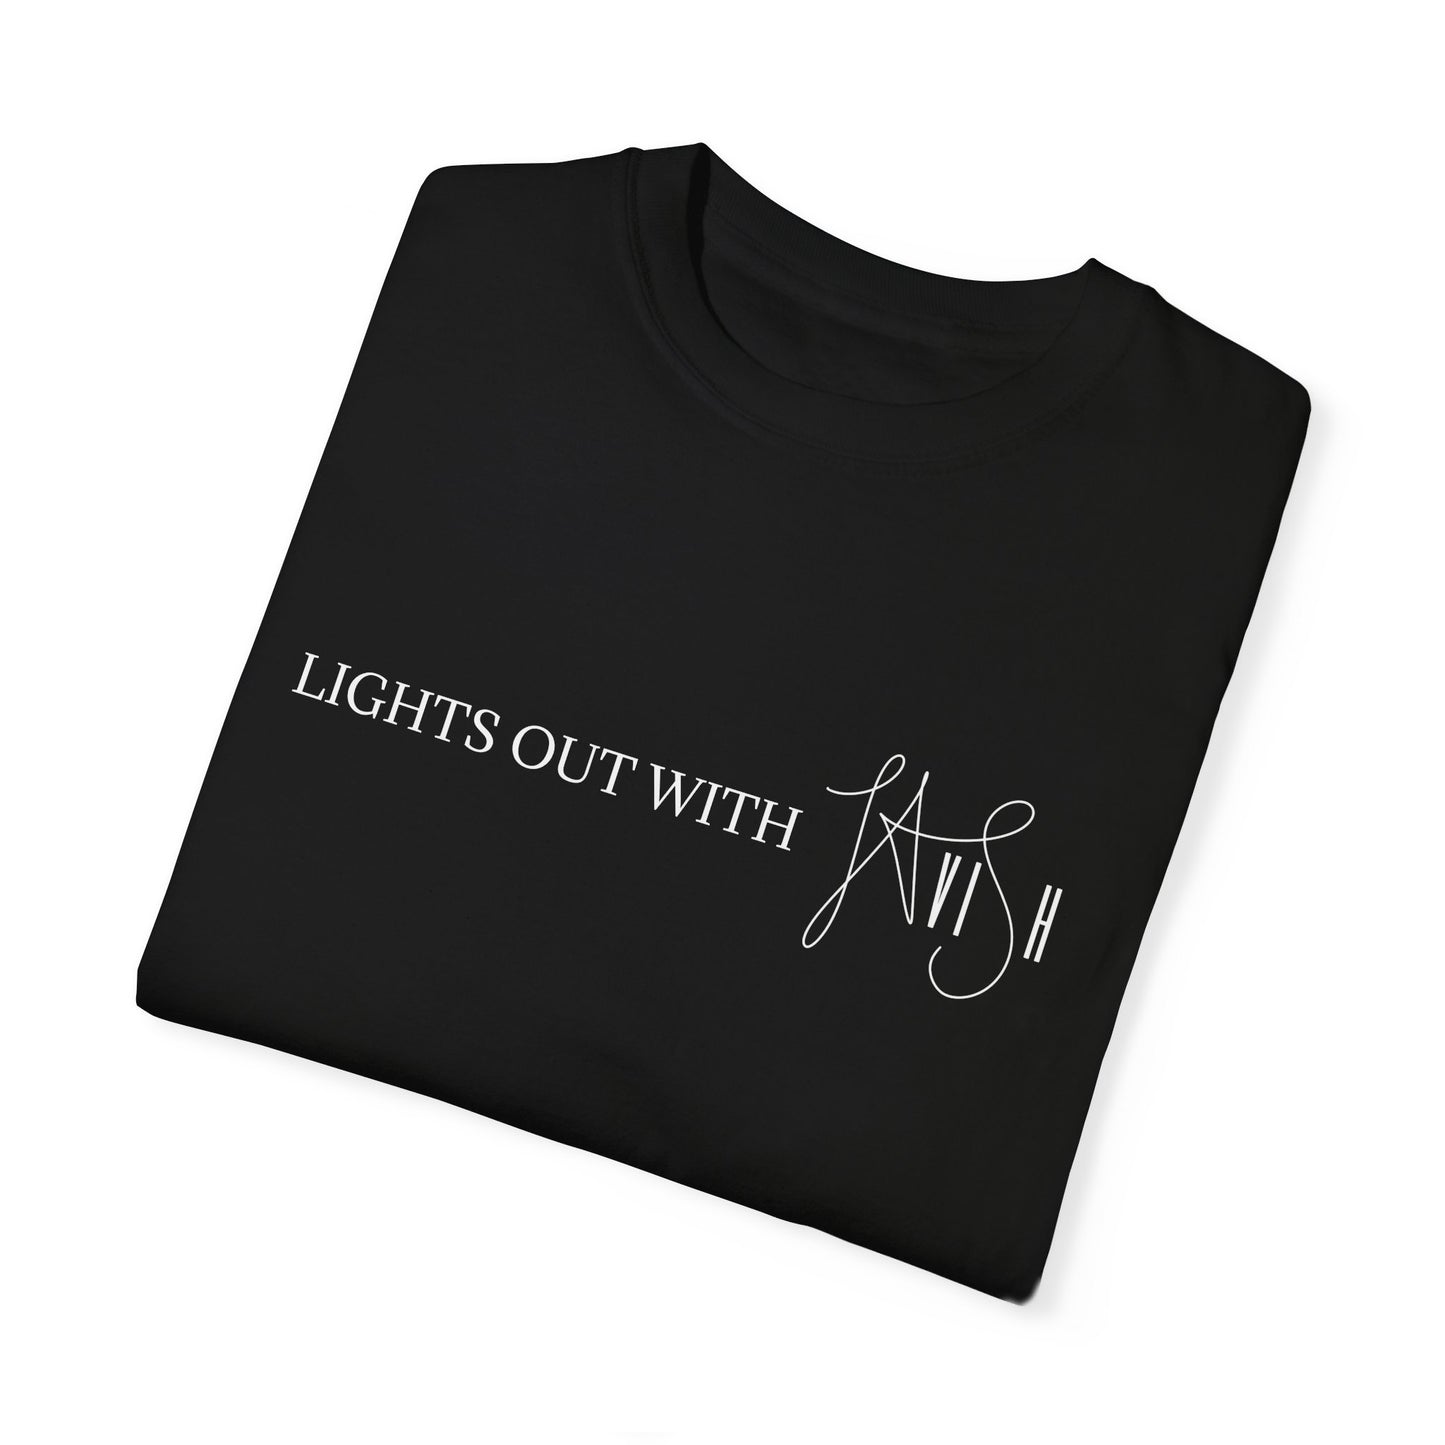 Lights Out With Lavish By LauLau T-shirt